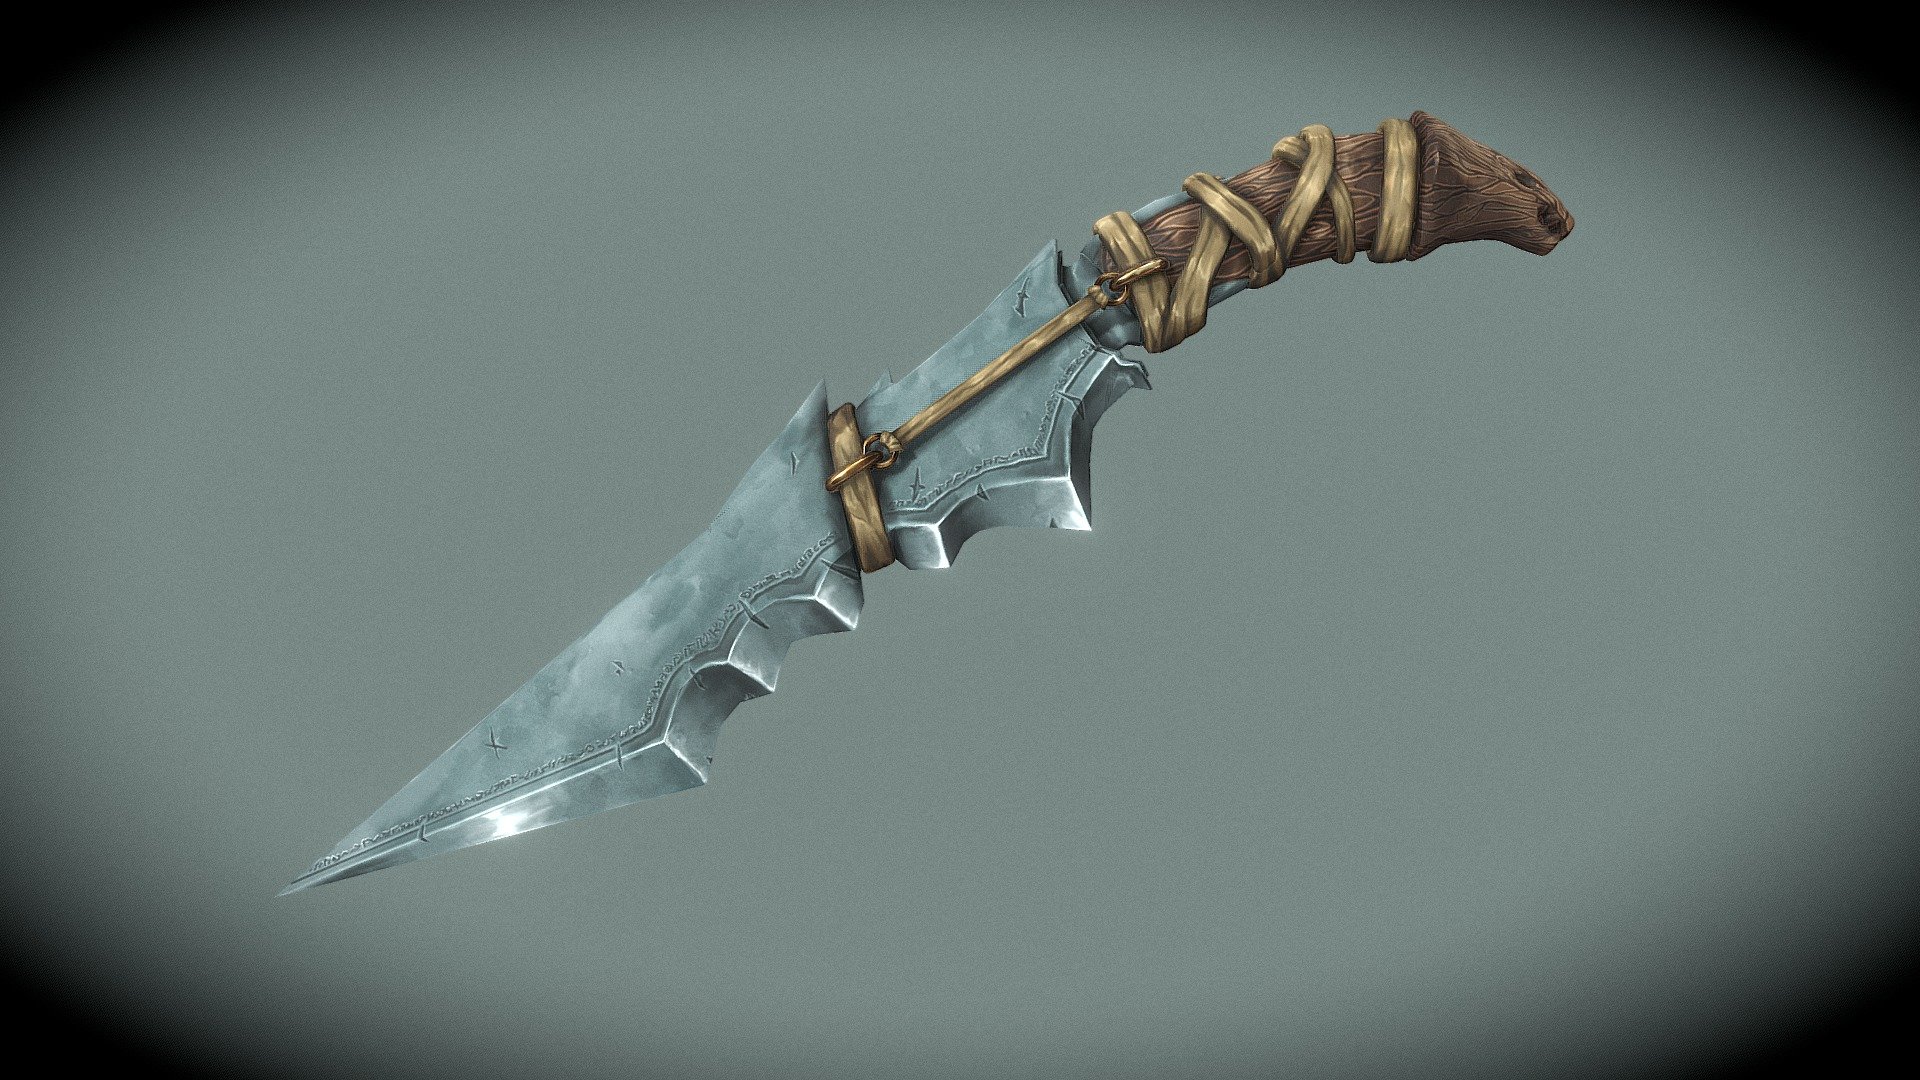 It's a stab that I made first in concept and then in 3D. I wanted to practice the hand painted style. I took Pyke's dagger from League of LEGENDS as a reference 3d model